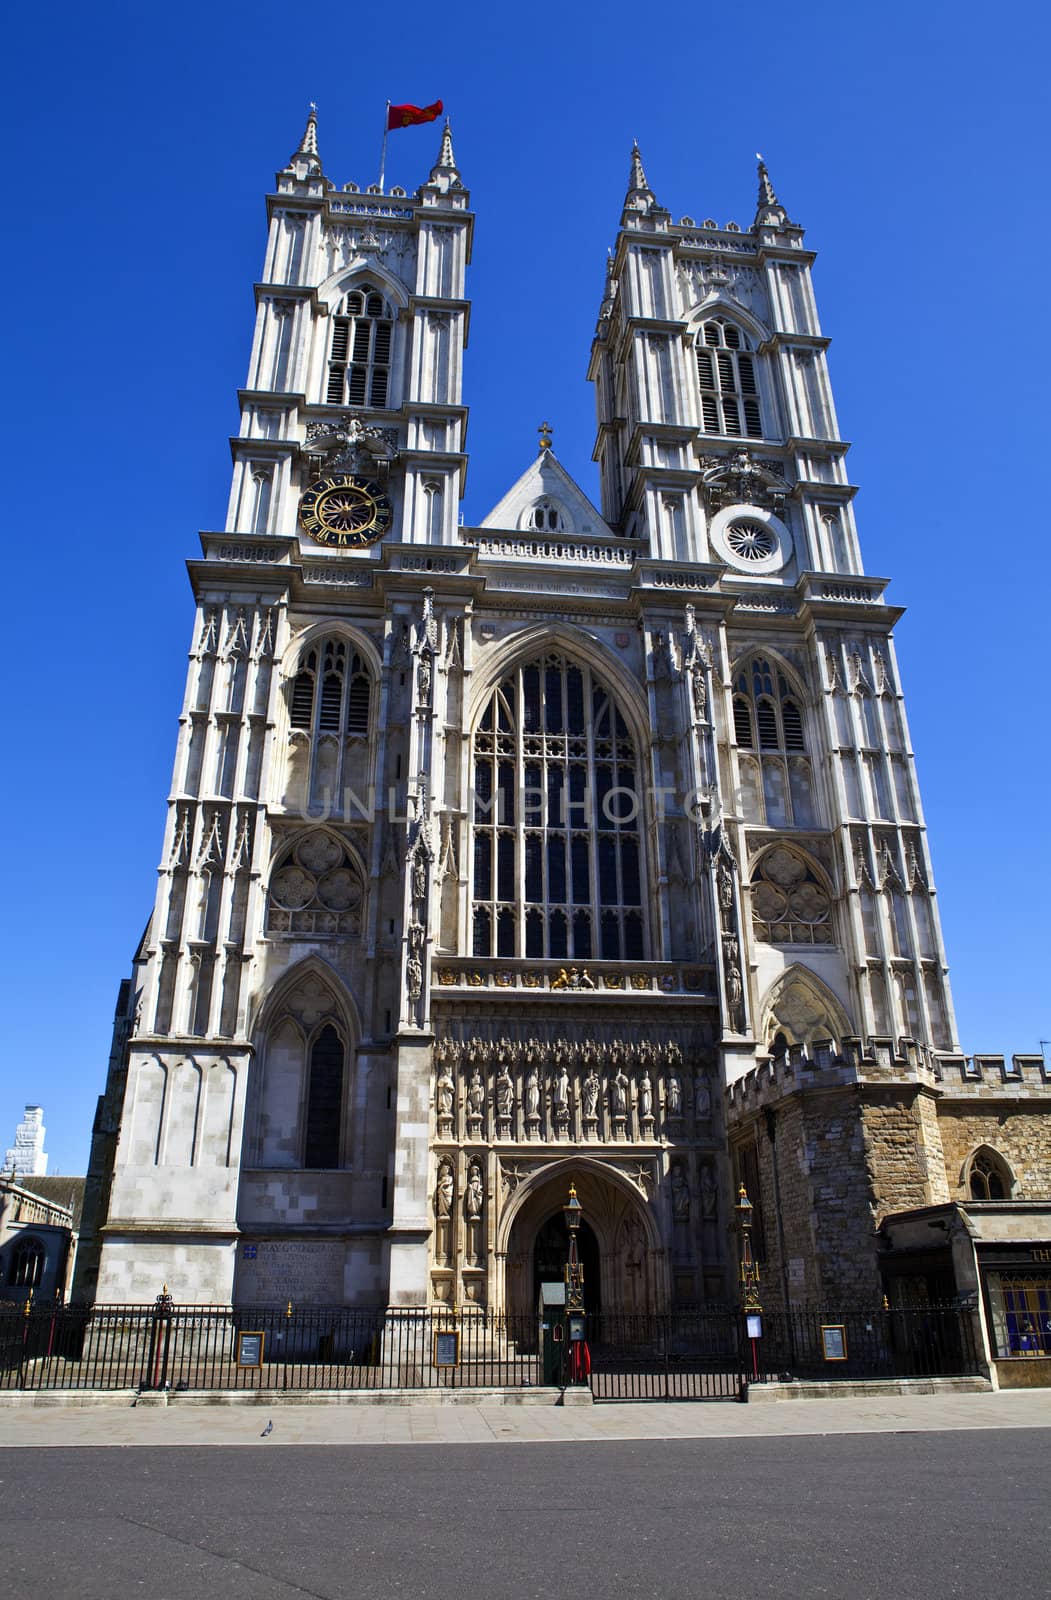 The beautiful Westminster Abbey in London.